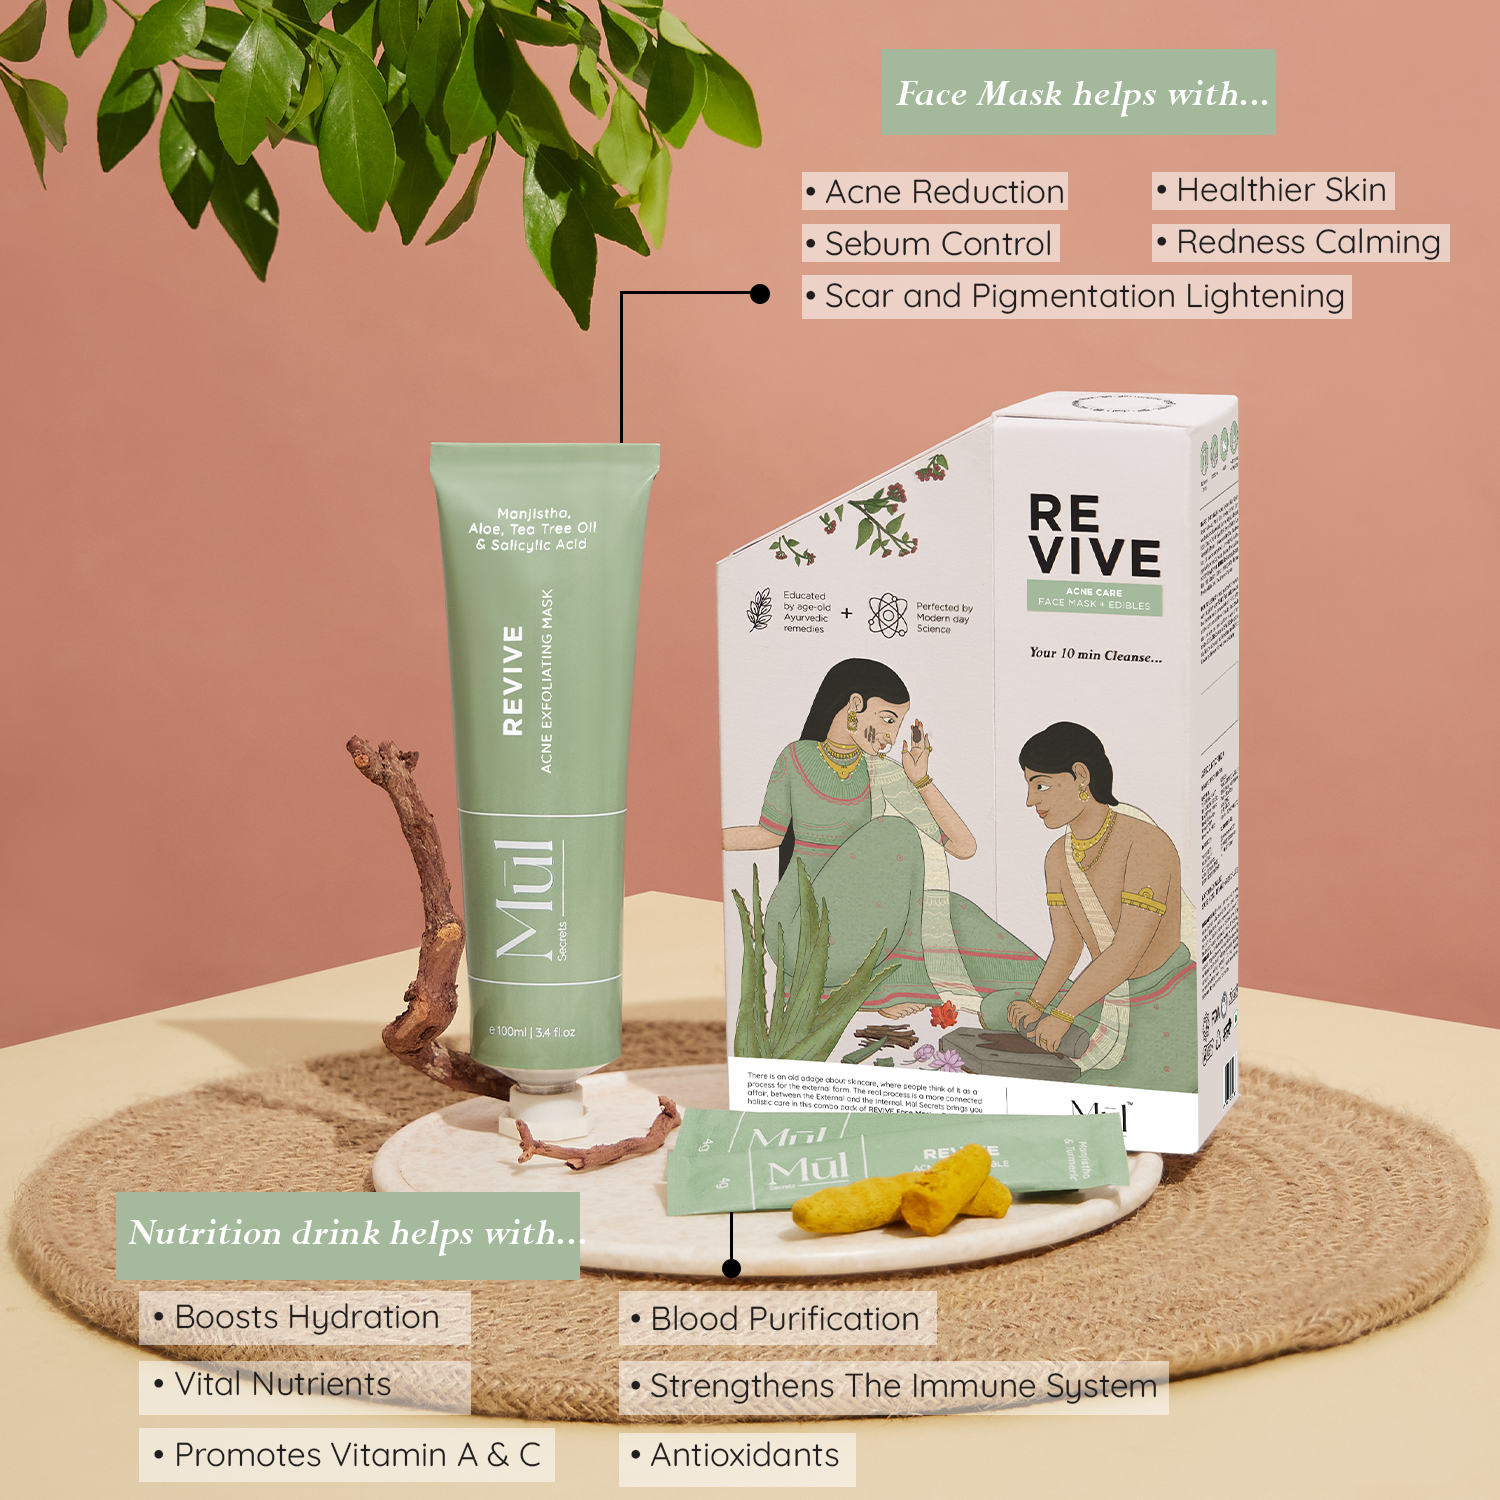 Revive Acne Exfoliating Care (Face Mask + Nutrition Drink) benefits